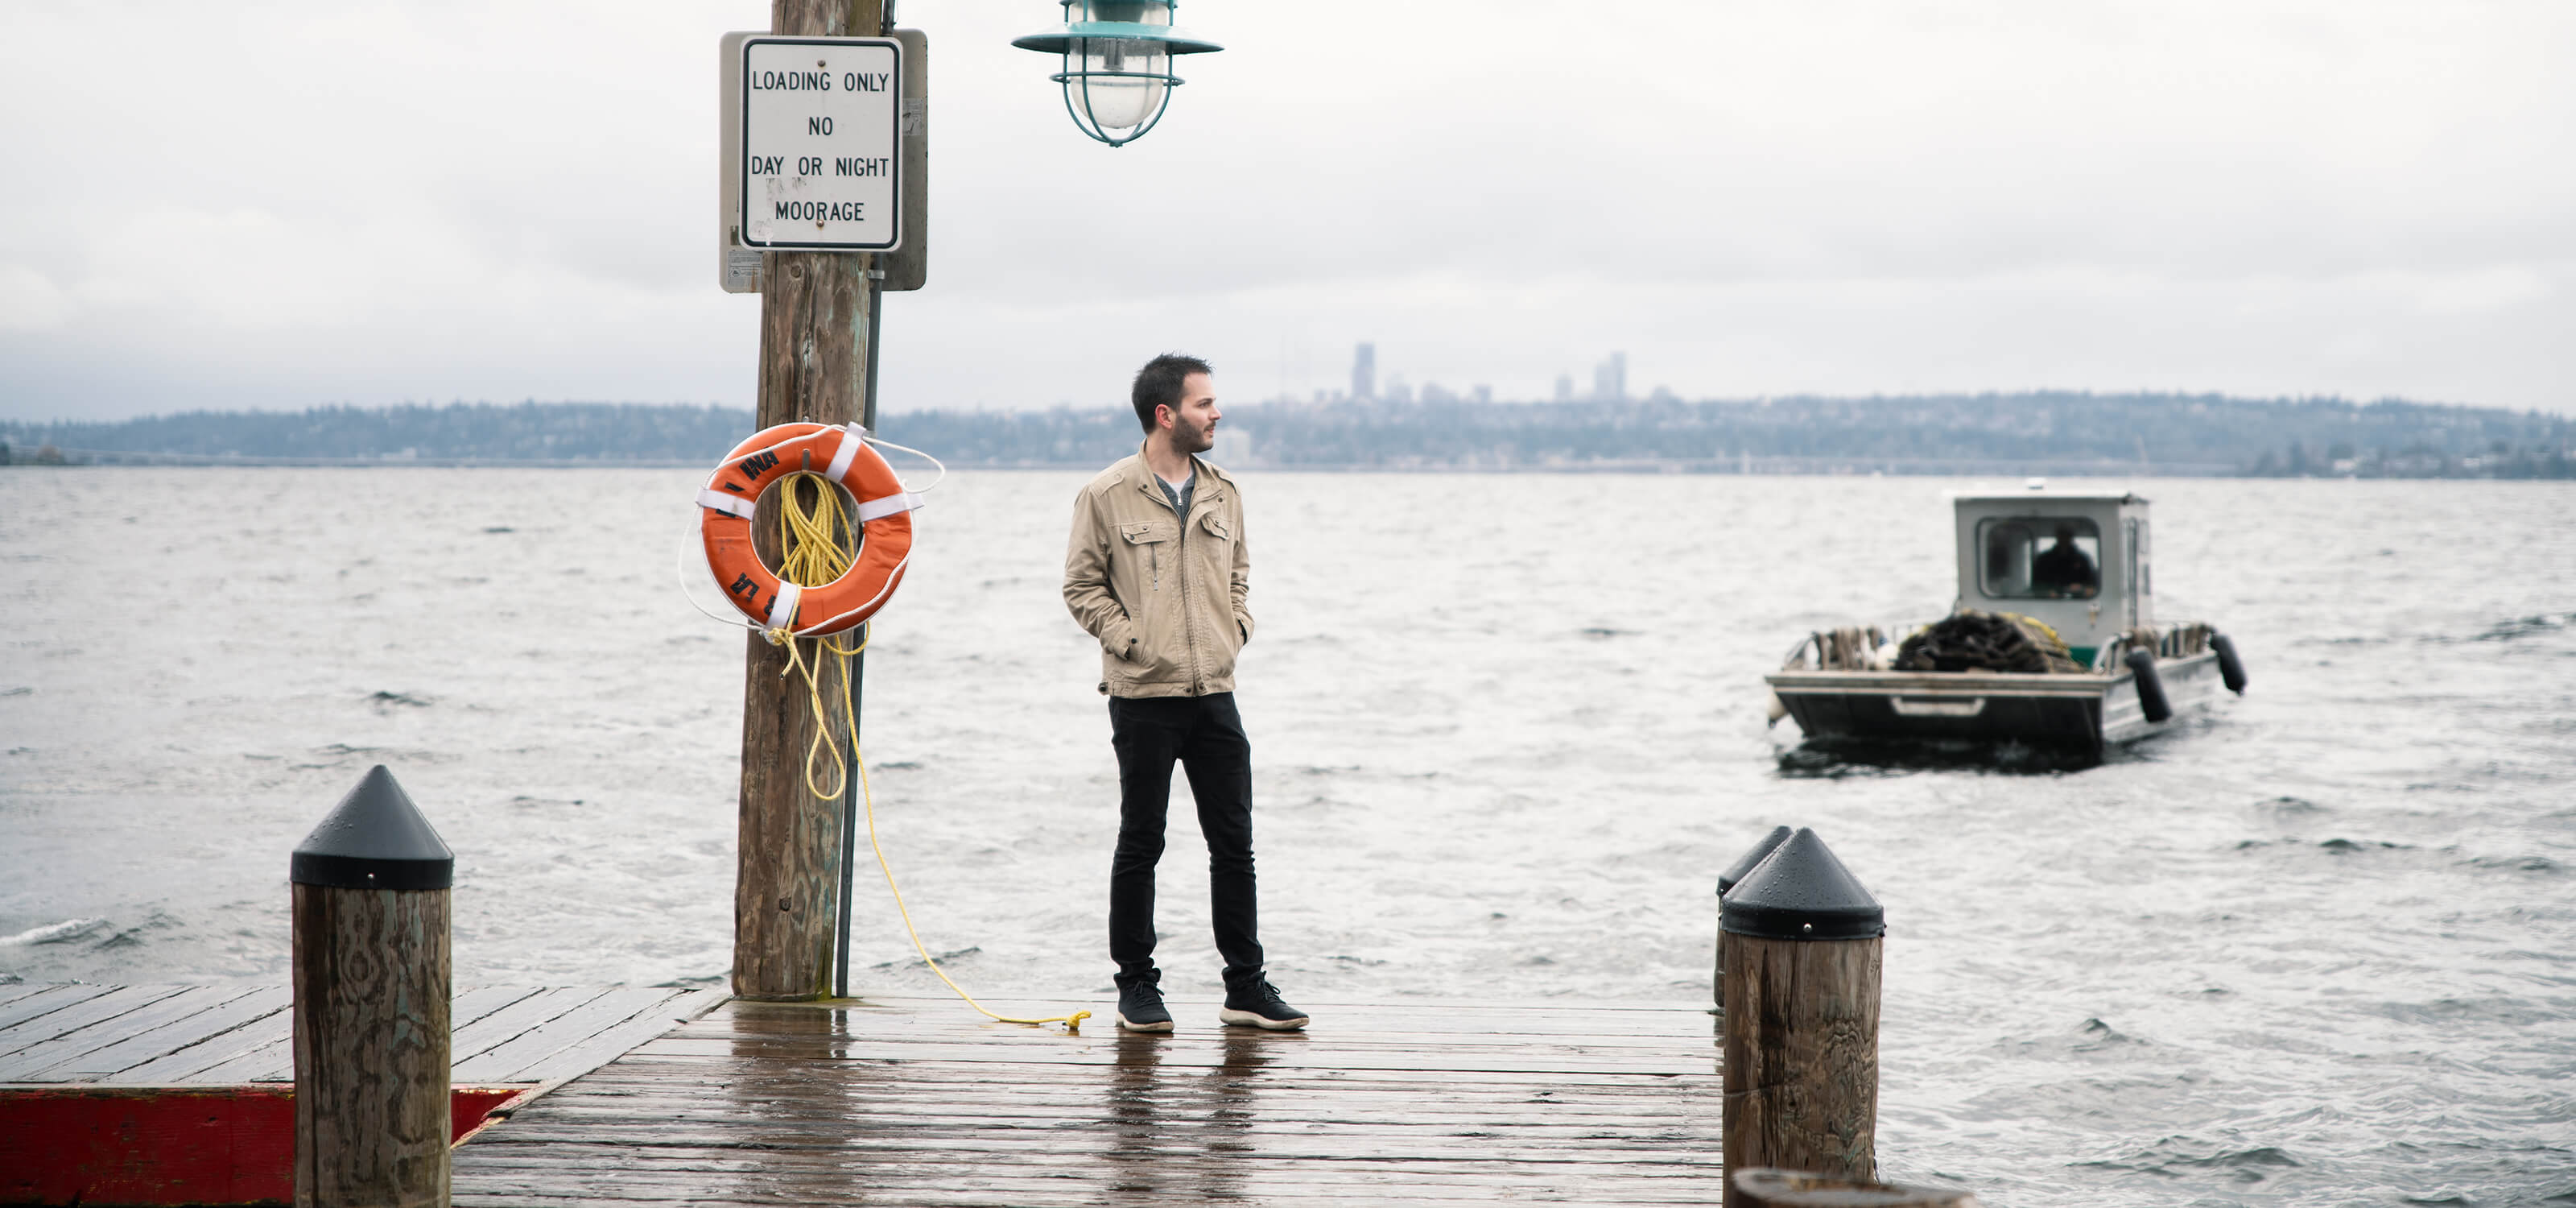 David Evans stands on the end of a dock with small boat and Seattle skyline in background.